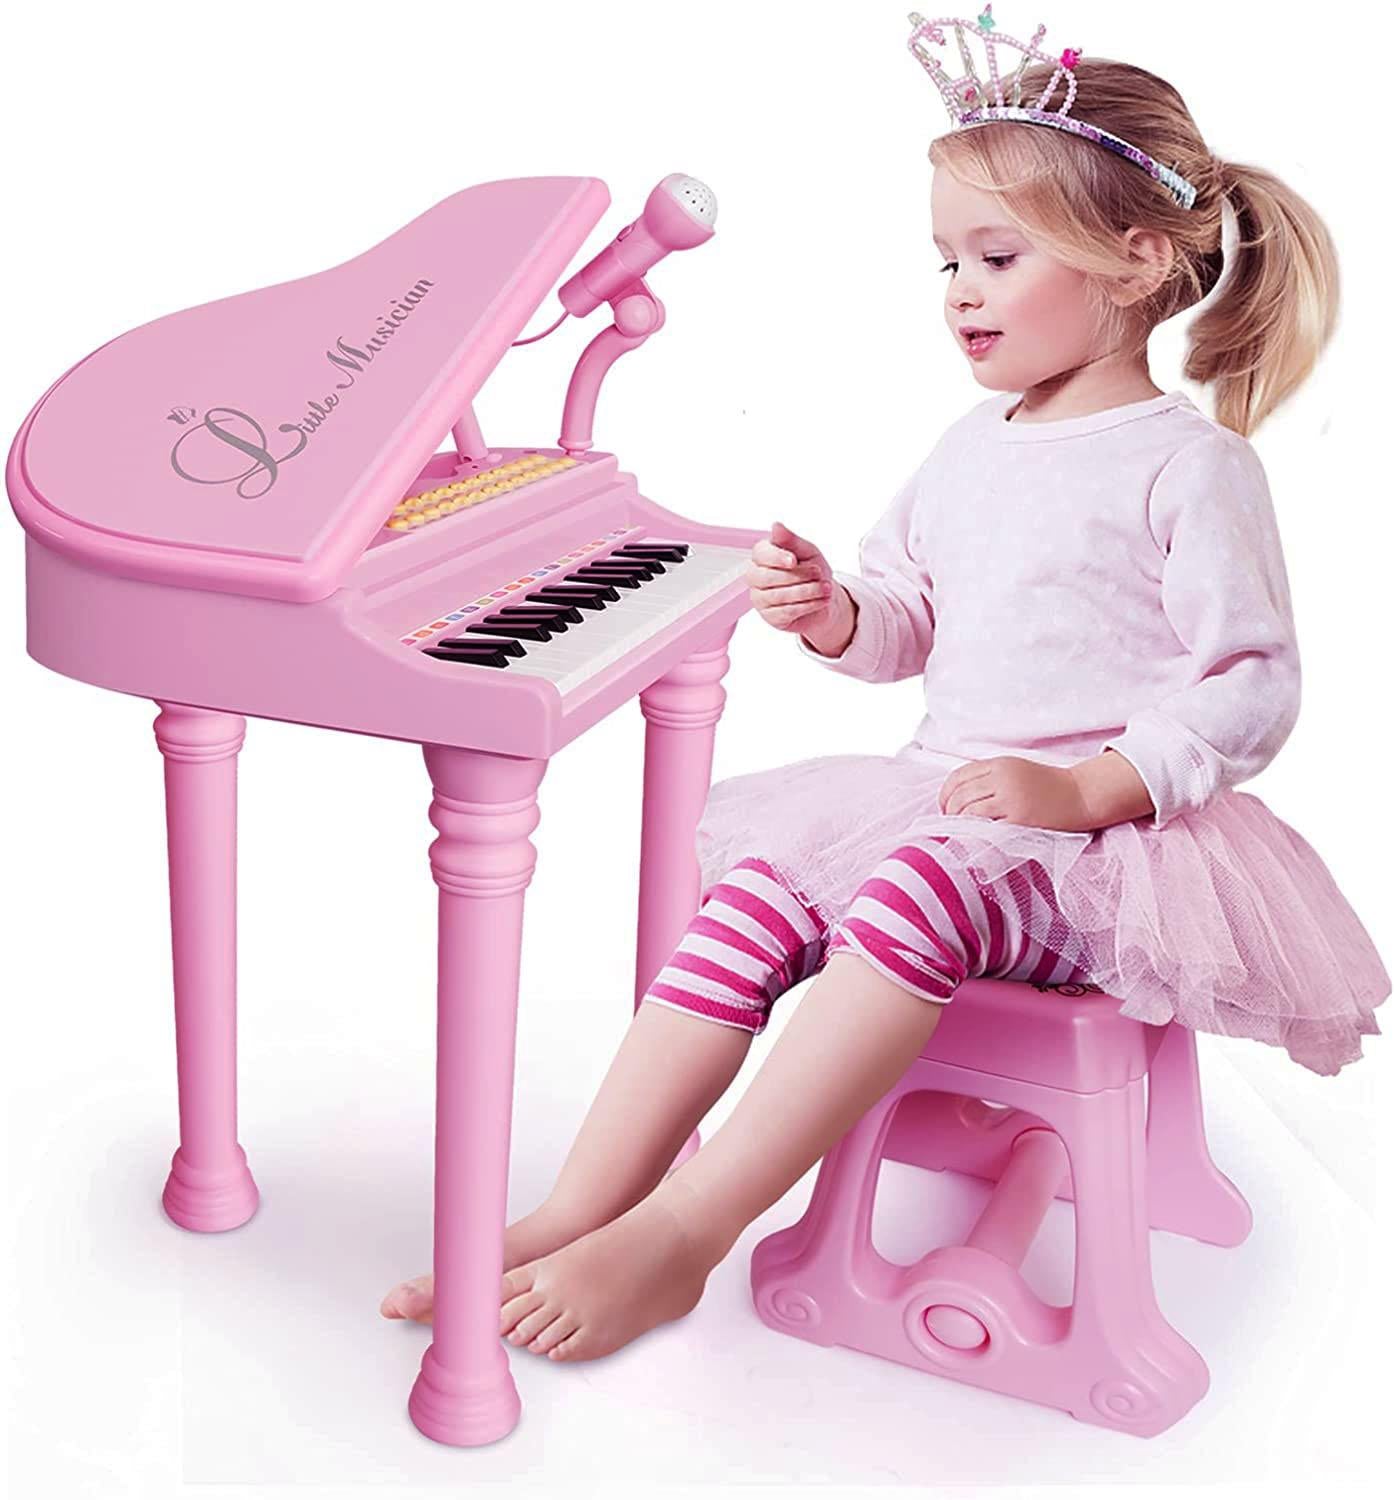 The Magic Toy Shop Toys and Games Pink Electronic Piano With Microphone and Stool